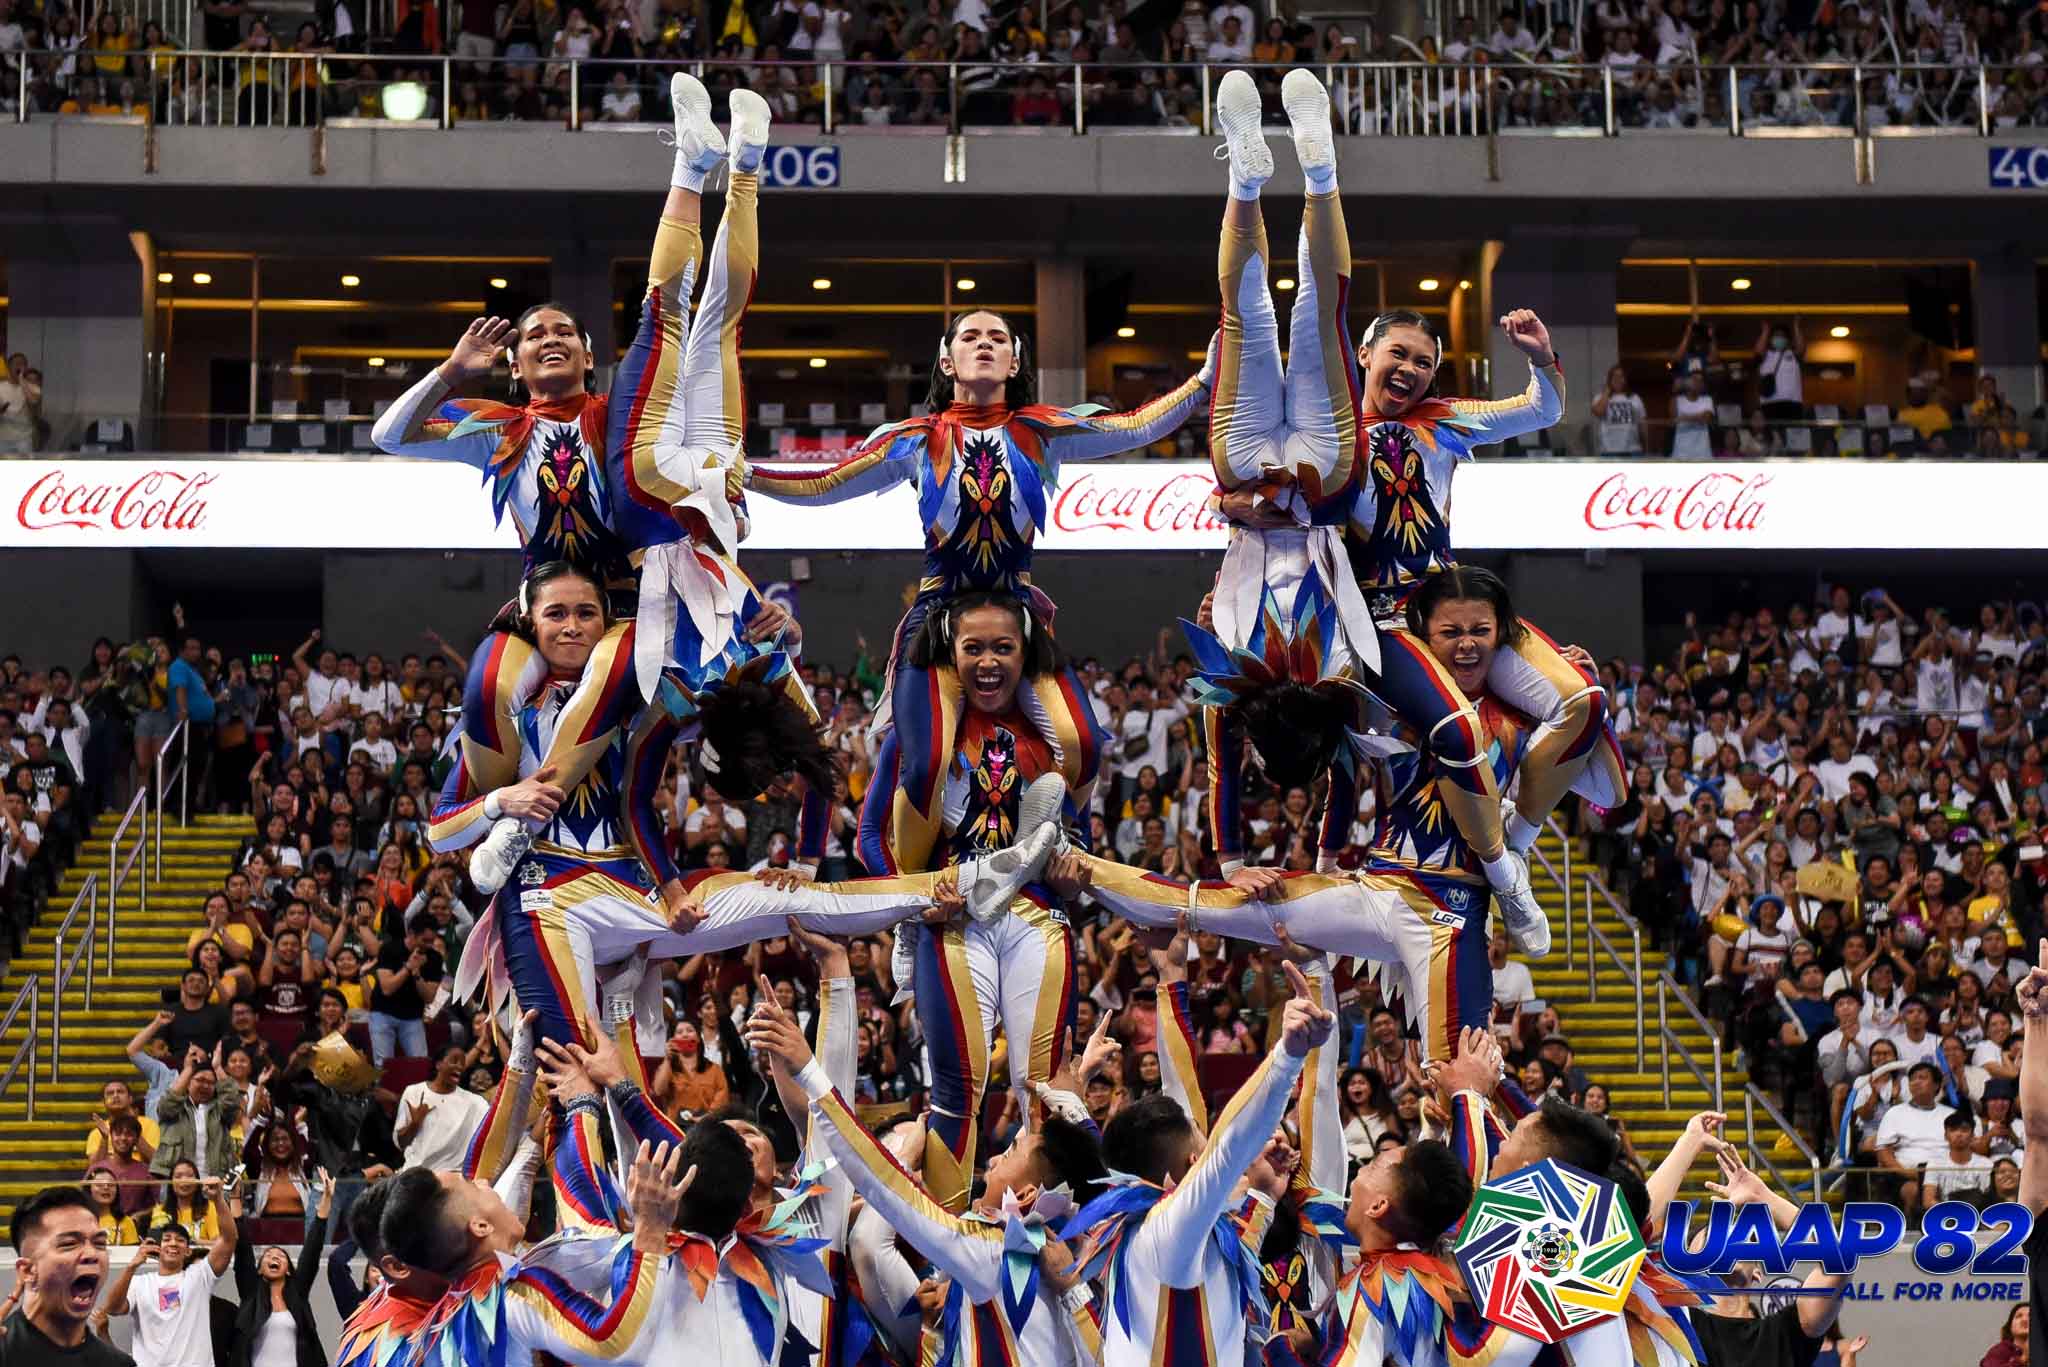 Watch UAAP Cheerdance Competition for FREE via Smarts GigaPlay App on May 22